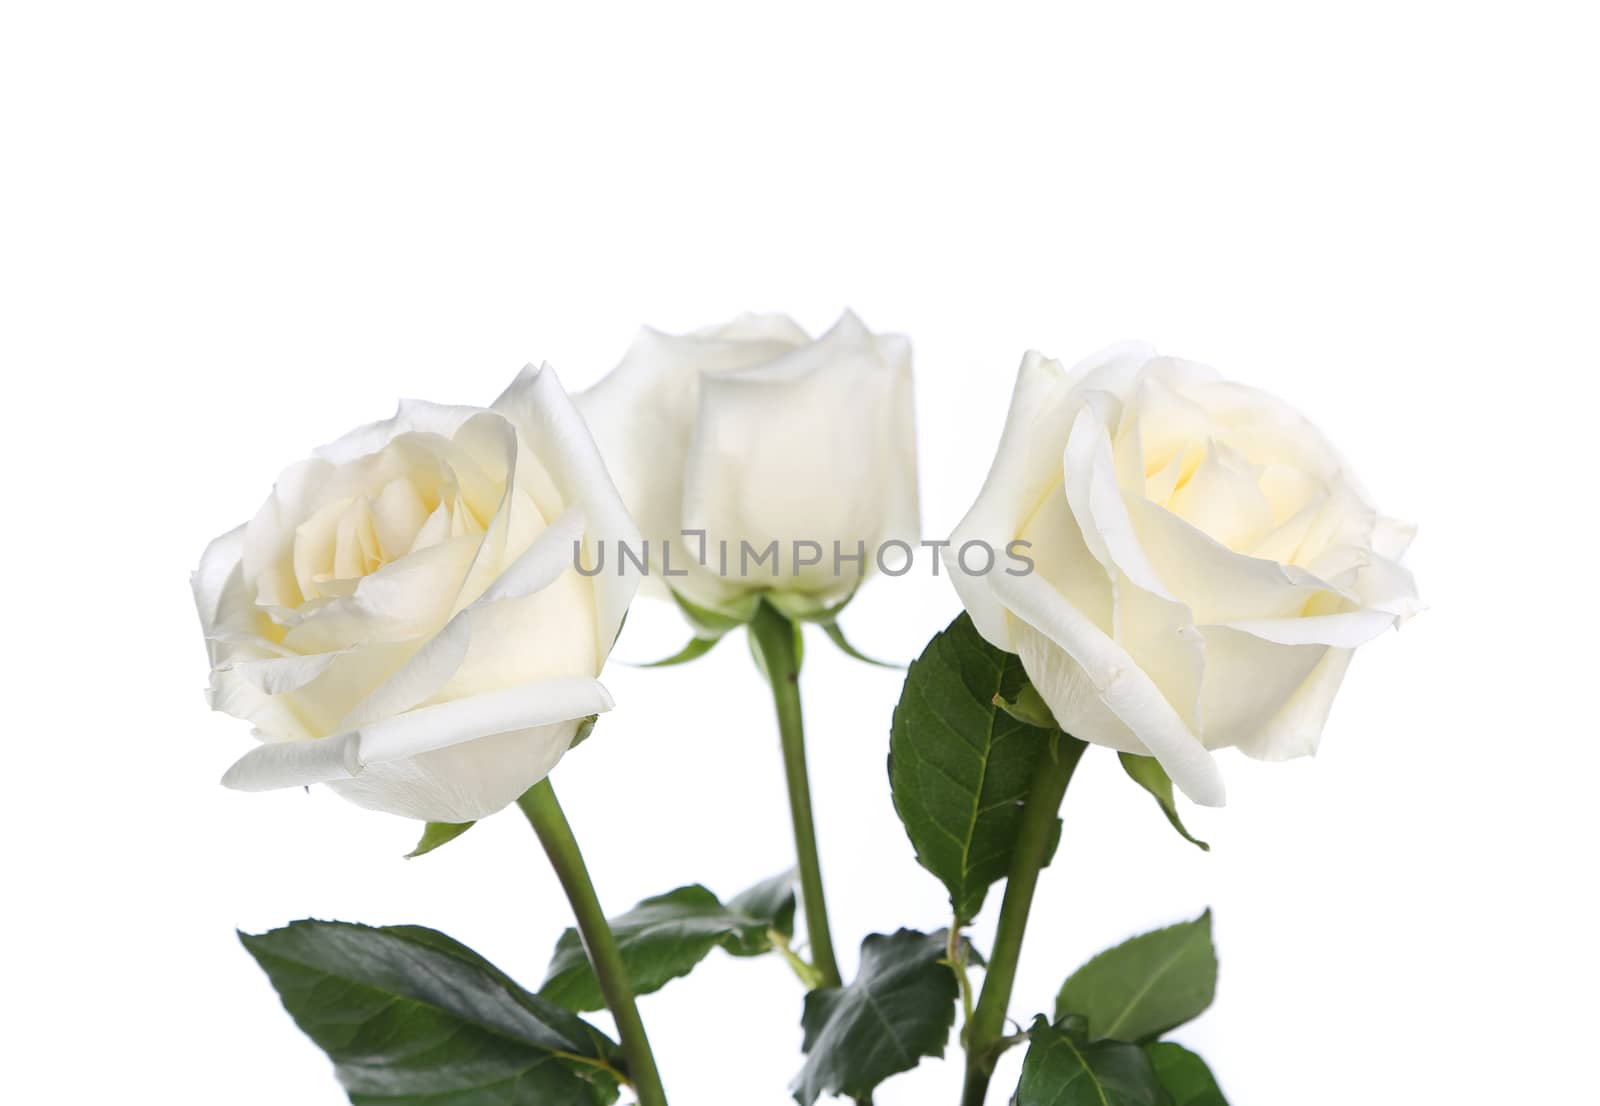 Three roses close-up on a white background